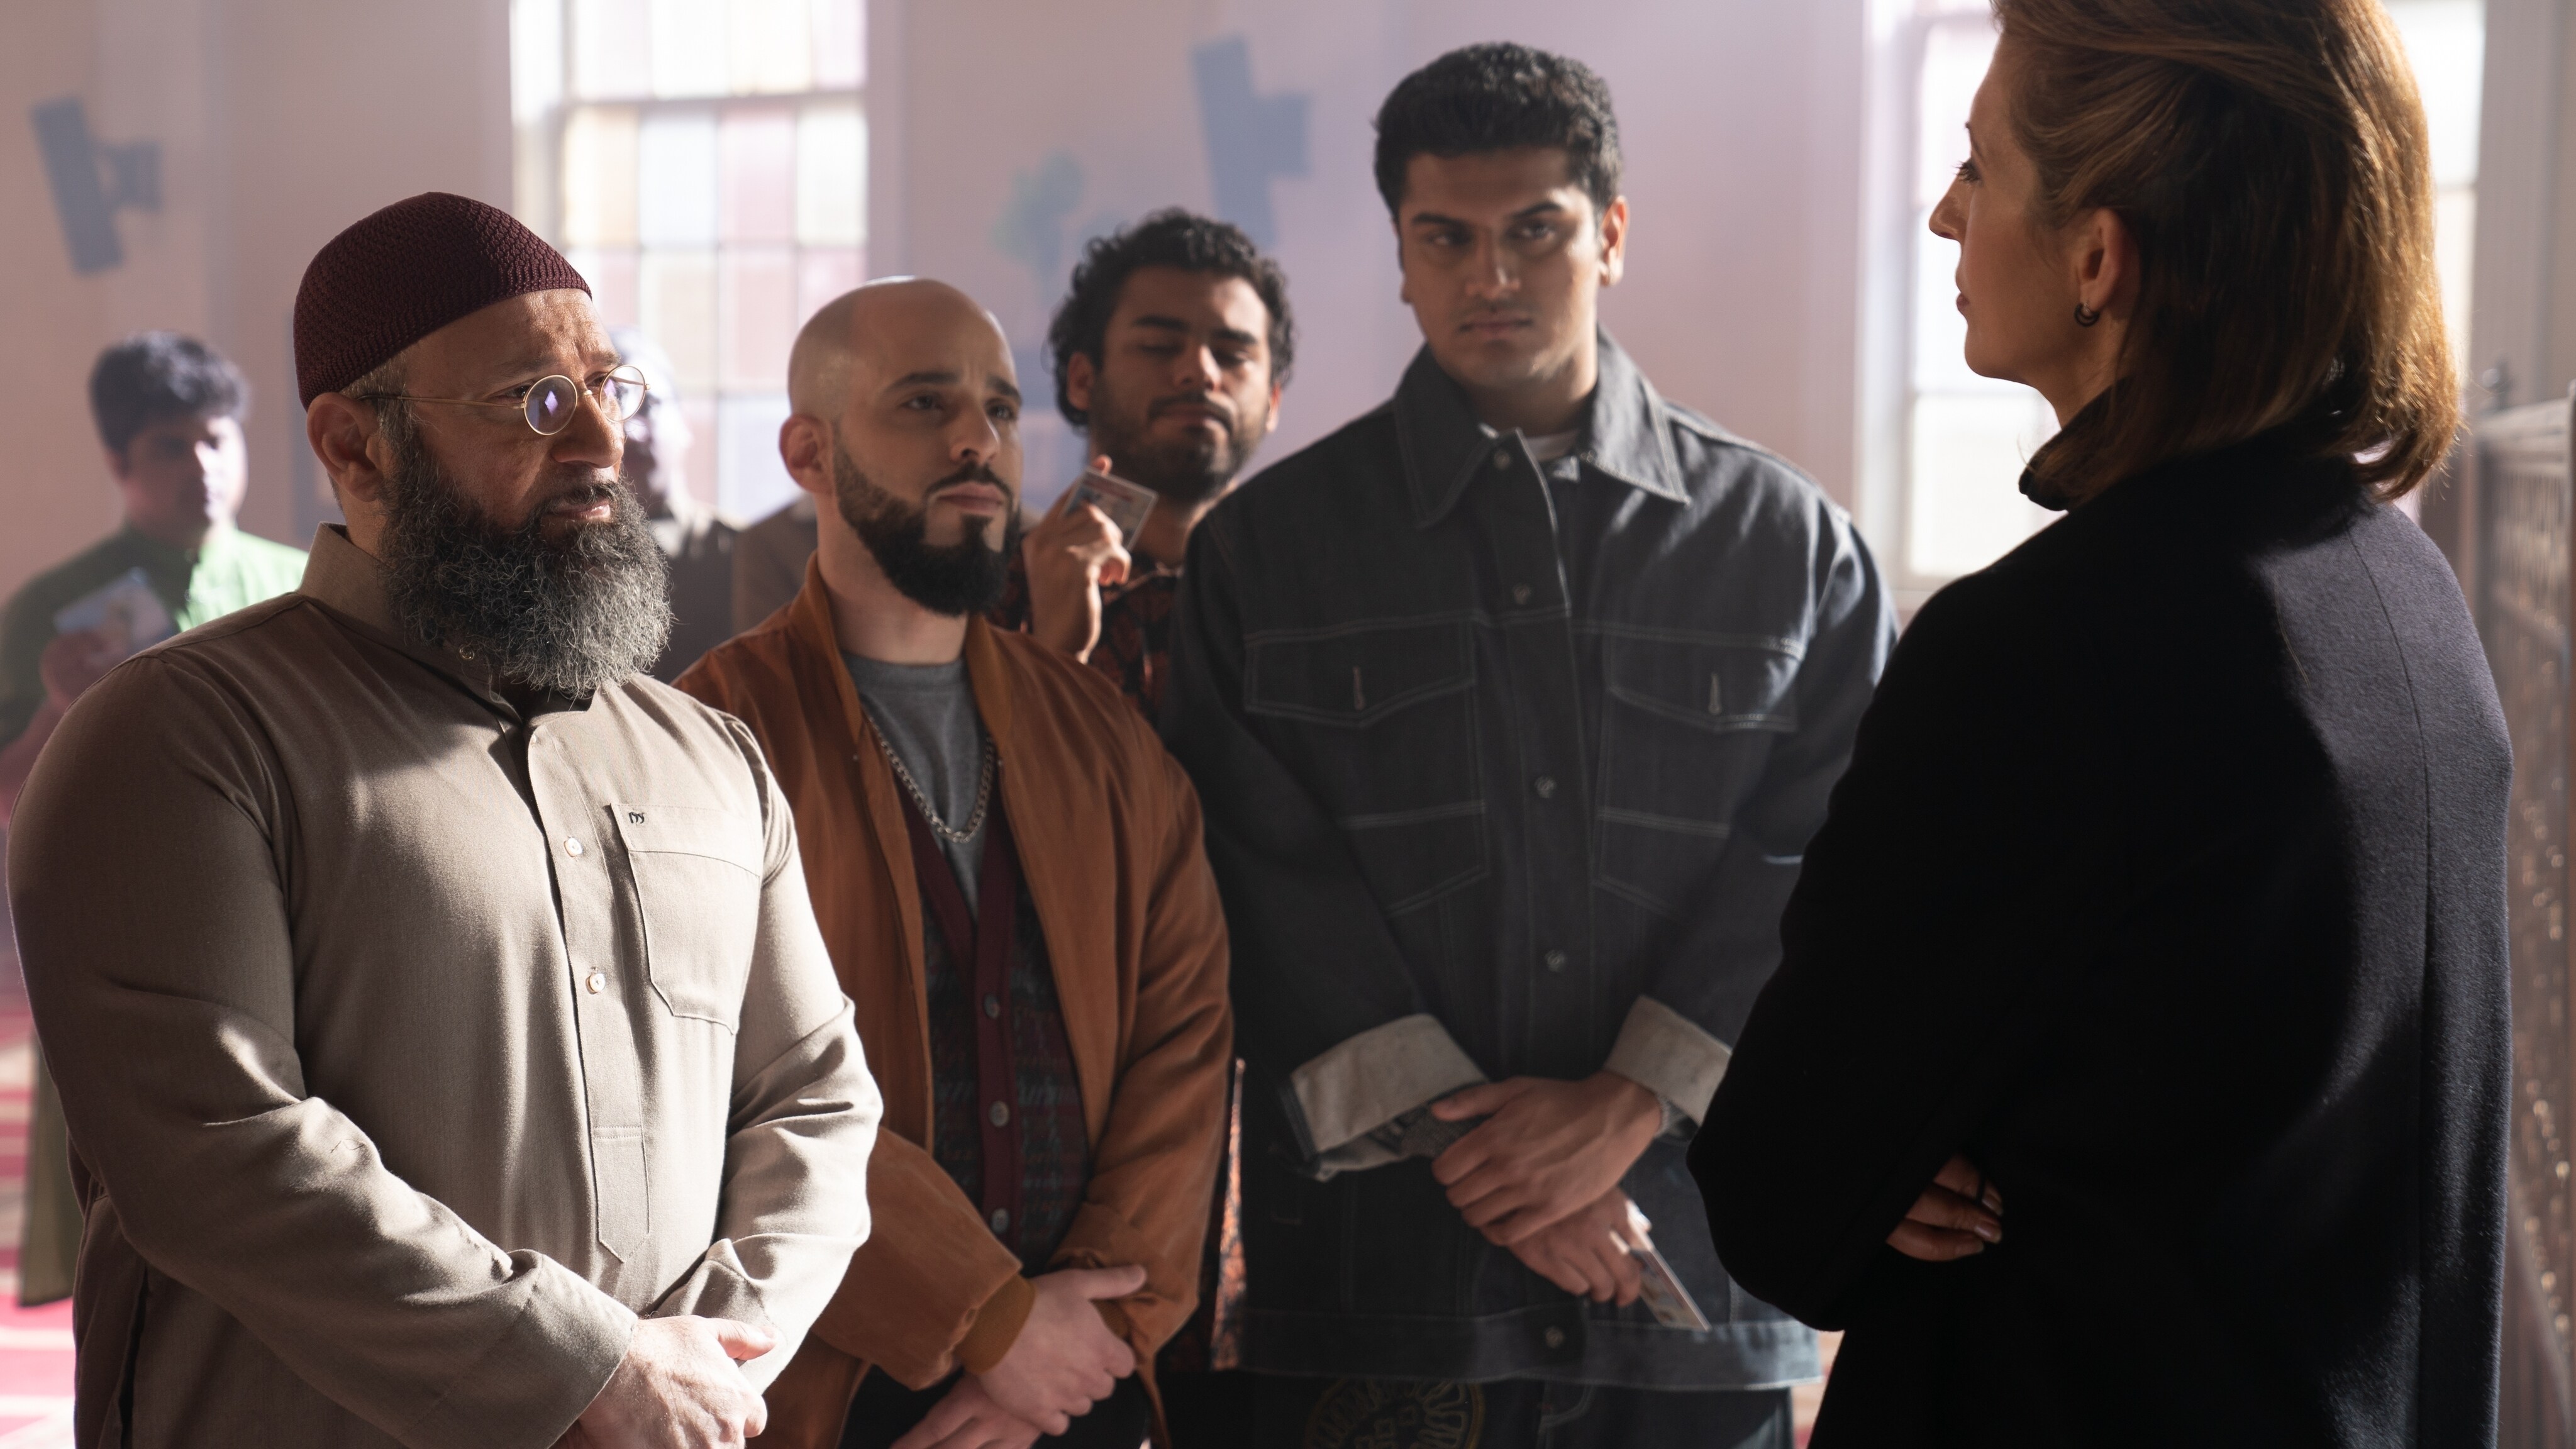 (Far left): Laith Nakli as Sheikh Abdallah, and (Far right): Alysia Reiner as Agent Sadie Deever in Marvel Studios' MS. MARVEL. Photo by Daniel McFadden. ©Marvel Studios 2022. All Rights Reserved.